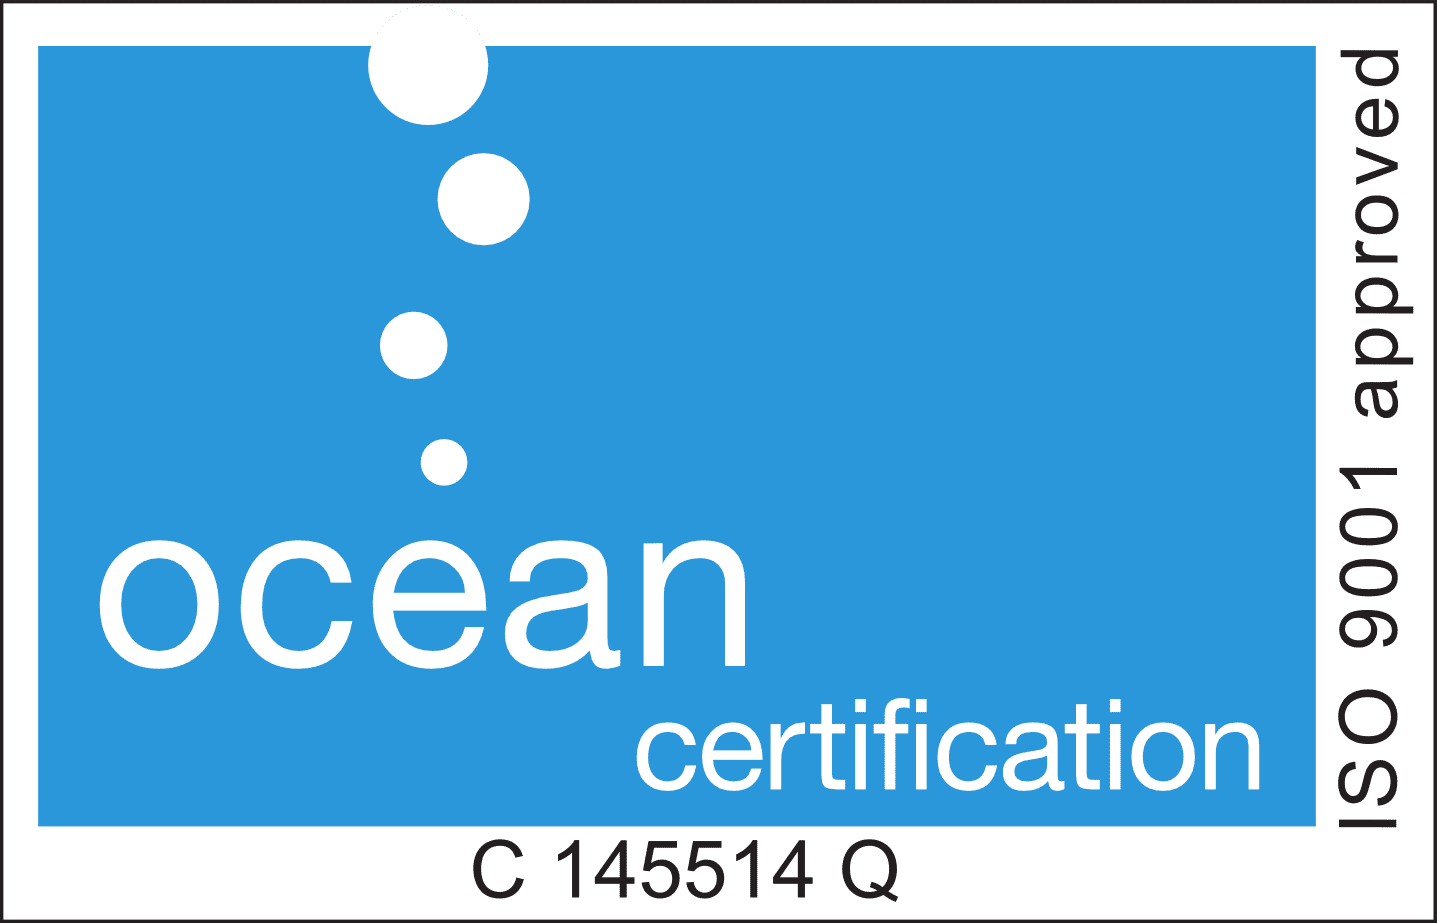 Solar testing and quality assurance ocean certification logo with solar capture registration number